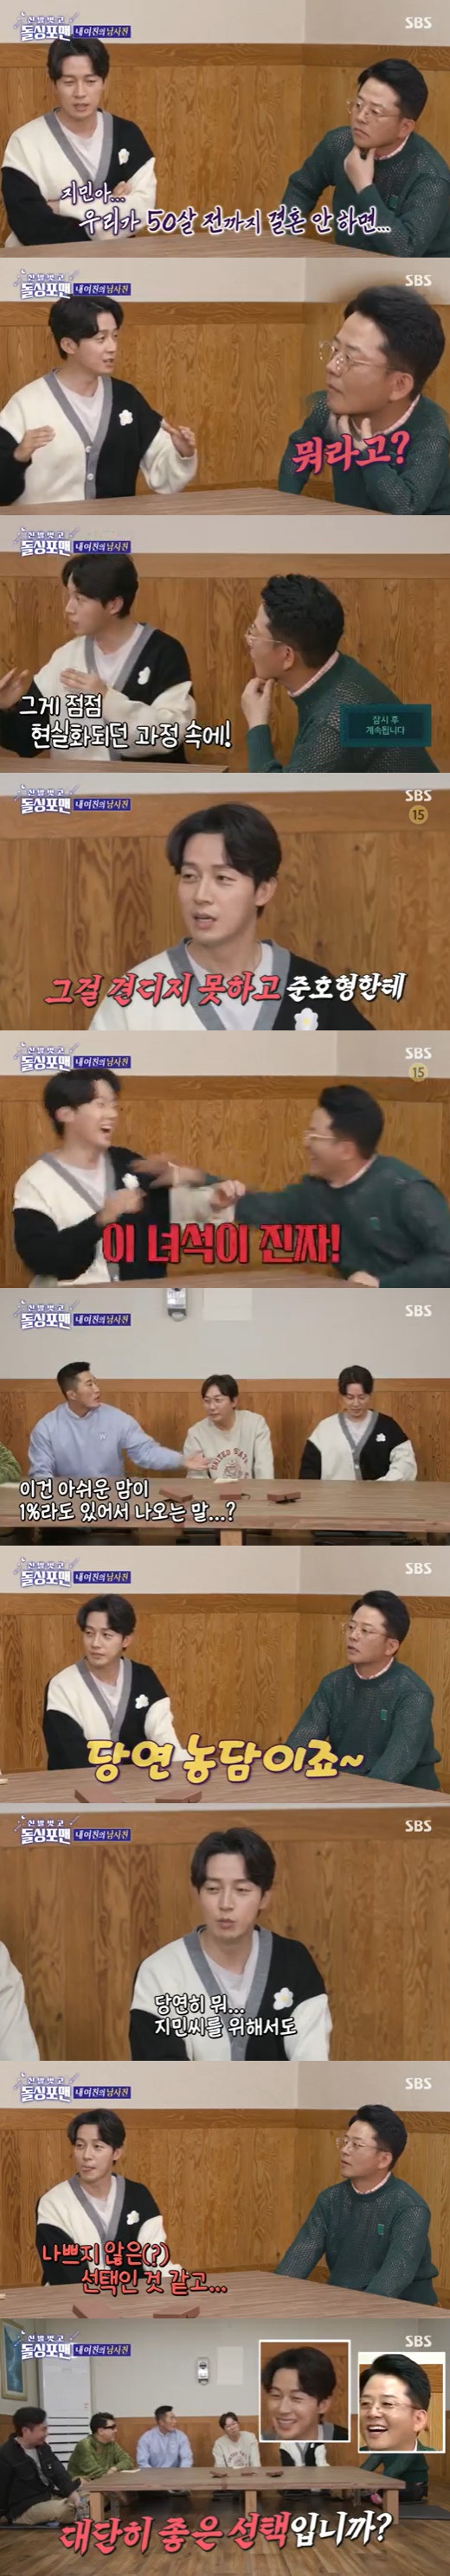 In Take off your shoes and dolsing foreman, Comedian Heo Kyung-hwan tells an anecdote that promised to marry Kim Jimin, causing the anger of his lover Kim Jun-ho.On the afternoon of the 19th, SBS Take off your shoes and dolsing foreman appeared as a guest by Heo Kyung-hwan and Kim Dong-Hyun, a martial arts player.On this day, Heo Kyung-hwan said, When the schedule for Doll Singles was scheduled, there was no Kim Jimin and (Kim) Junhos devotion article.But in fact, I do not have any connection with Kim Jimin.Kim Jun-ho emphasized Kim Jimin to Heo Kyung-hwan, I am a brother! And laughed.Heo Kyung-hwan said: Its not a frenzy between Comedians, the group chat stopped that day, I wanted to what, almost stopped like Wi-Fi was not bursting.I want to end well in the history of gags, he said. Everyone waits for me, waits for me. (Oh) Nami, (Kim) Jimin.Heo Kyung-hwan said, Im talking about Junho. I became so close when I was playing flower beggar corner with Kim Jimin in the past.So, Jimin, if we dont get married until were 50, dont just ask, lets do it with you and me.As I turned 42, Kim Jimin could not bear it and went to Junhos brother in the process of becoming more and more realistic. He eventually caught Kim Jun-ho by the bomb Confessions.However, Heo Kyung-hwan asked Kim Dong-Hyuns question, Is not this because there is even 1% of the heart?Of course, it seems to be Choices that are not bad for Jimin. Kim Jun-ho caught Heo Kyung-hwans neck again, and Heo Kyung-hwan laughed, saying, So are you very good Choices?